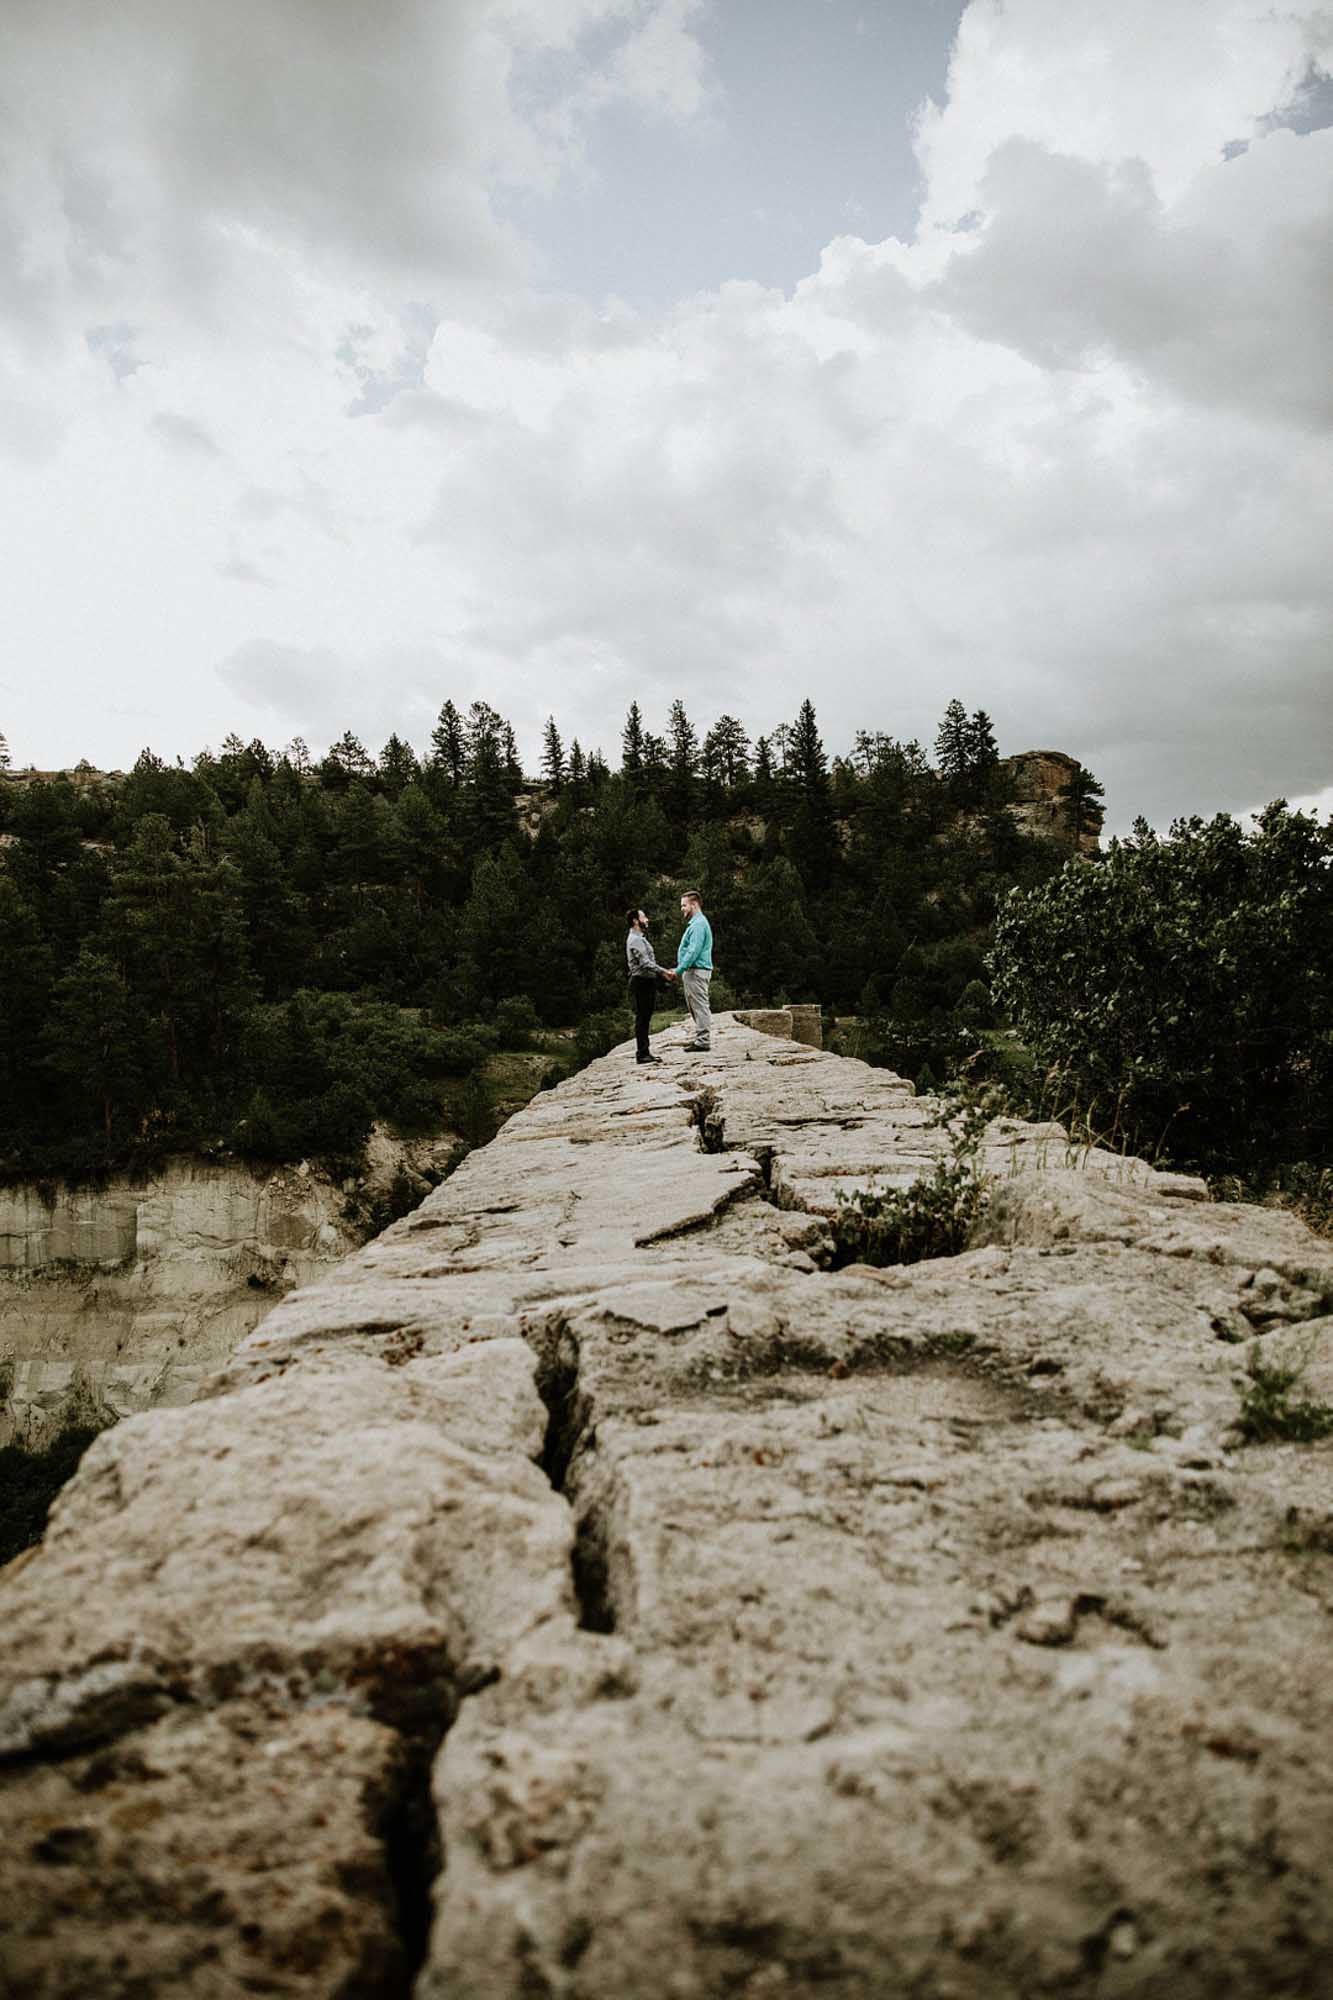 Touching engagement session amidst lush colorado greenery | Rachel Veltri Photography | Featured on Equally Wed, the leading LGBTQ+ wedding magazine